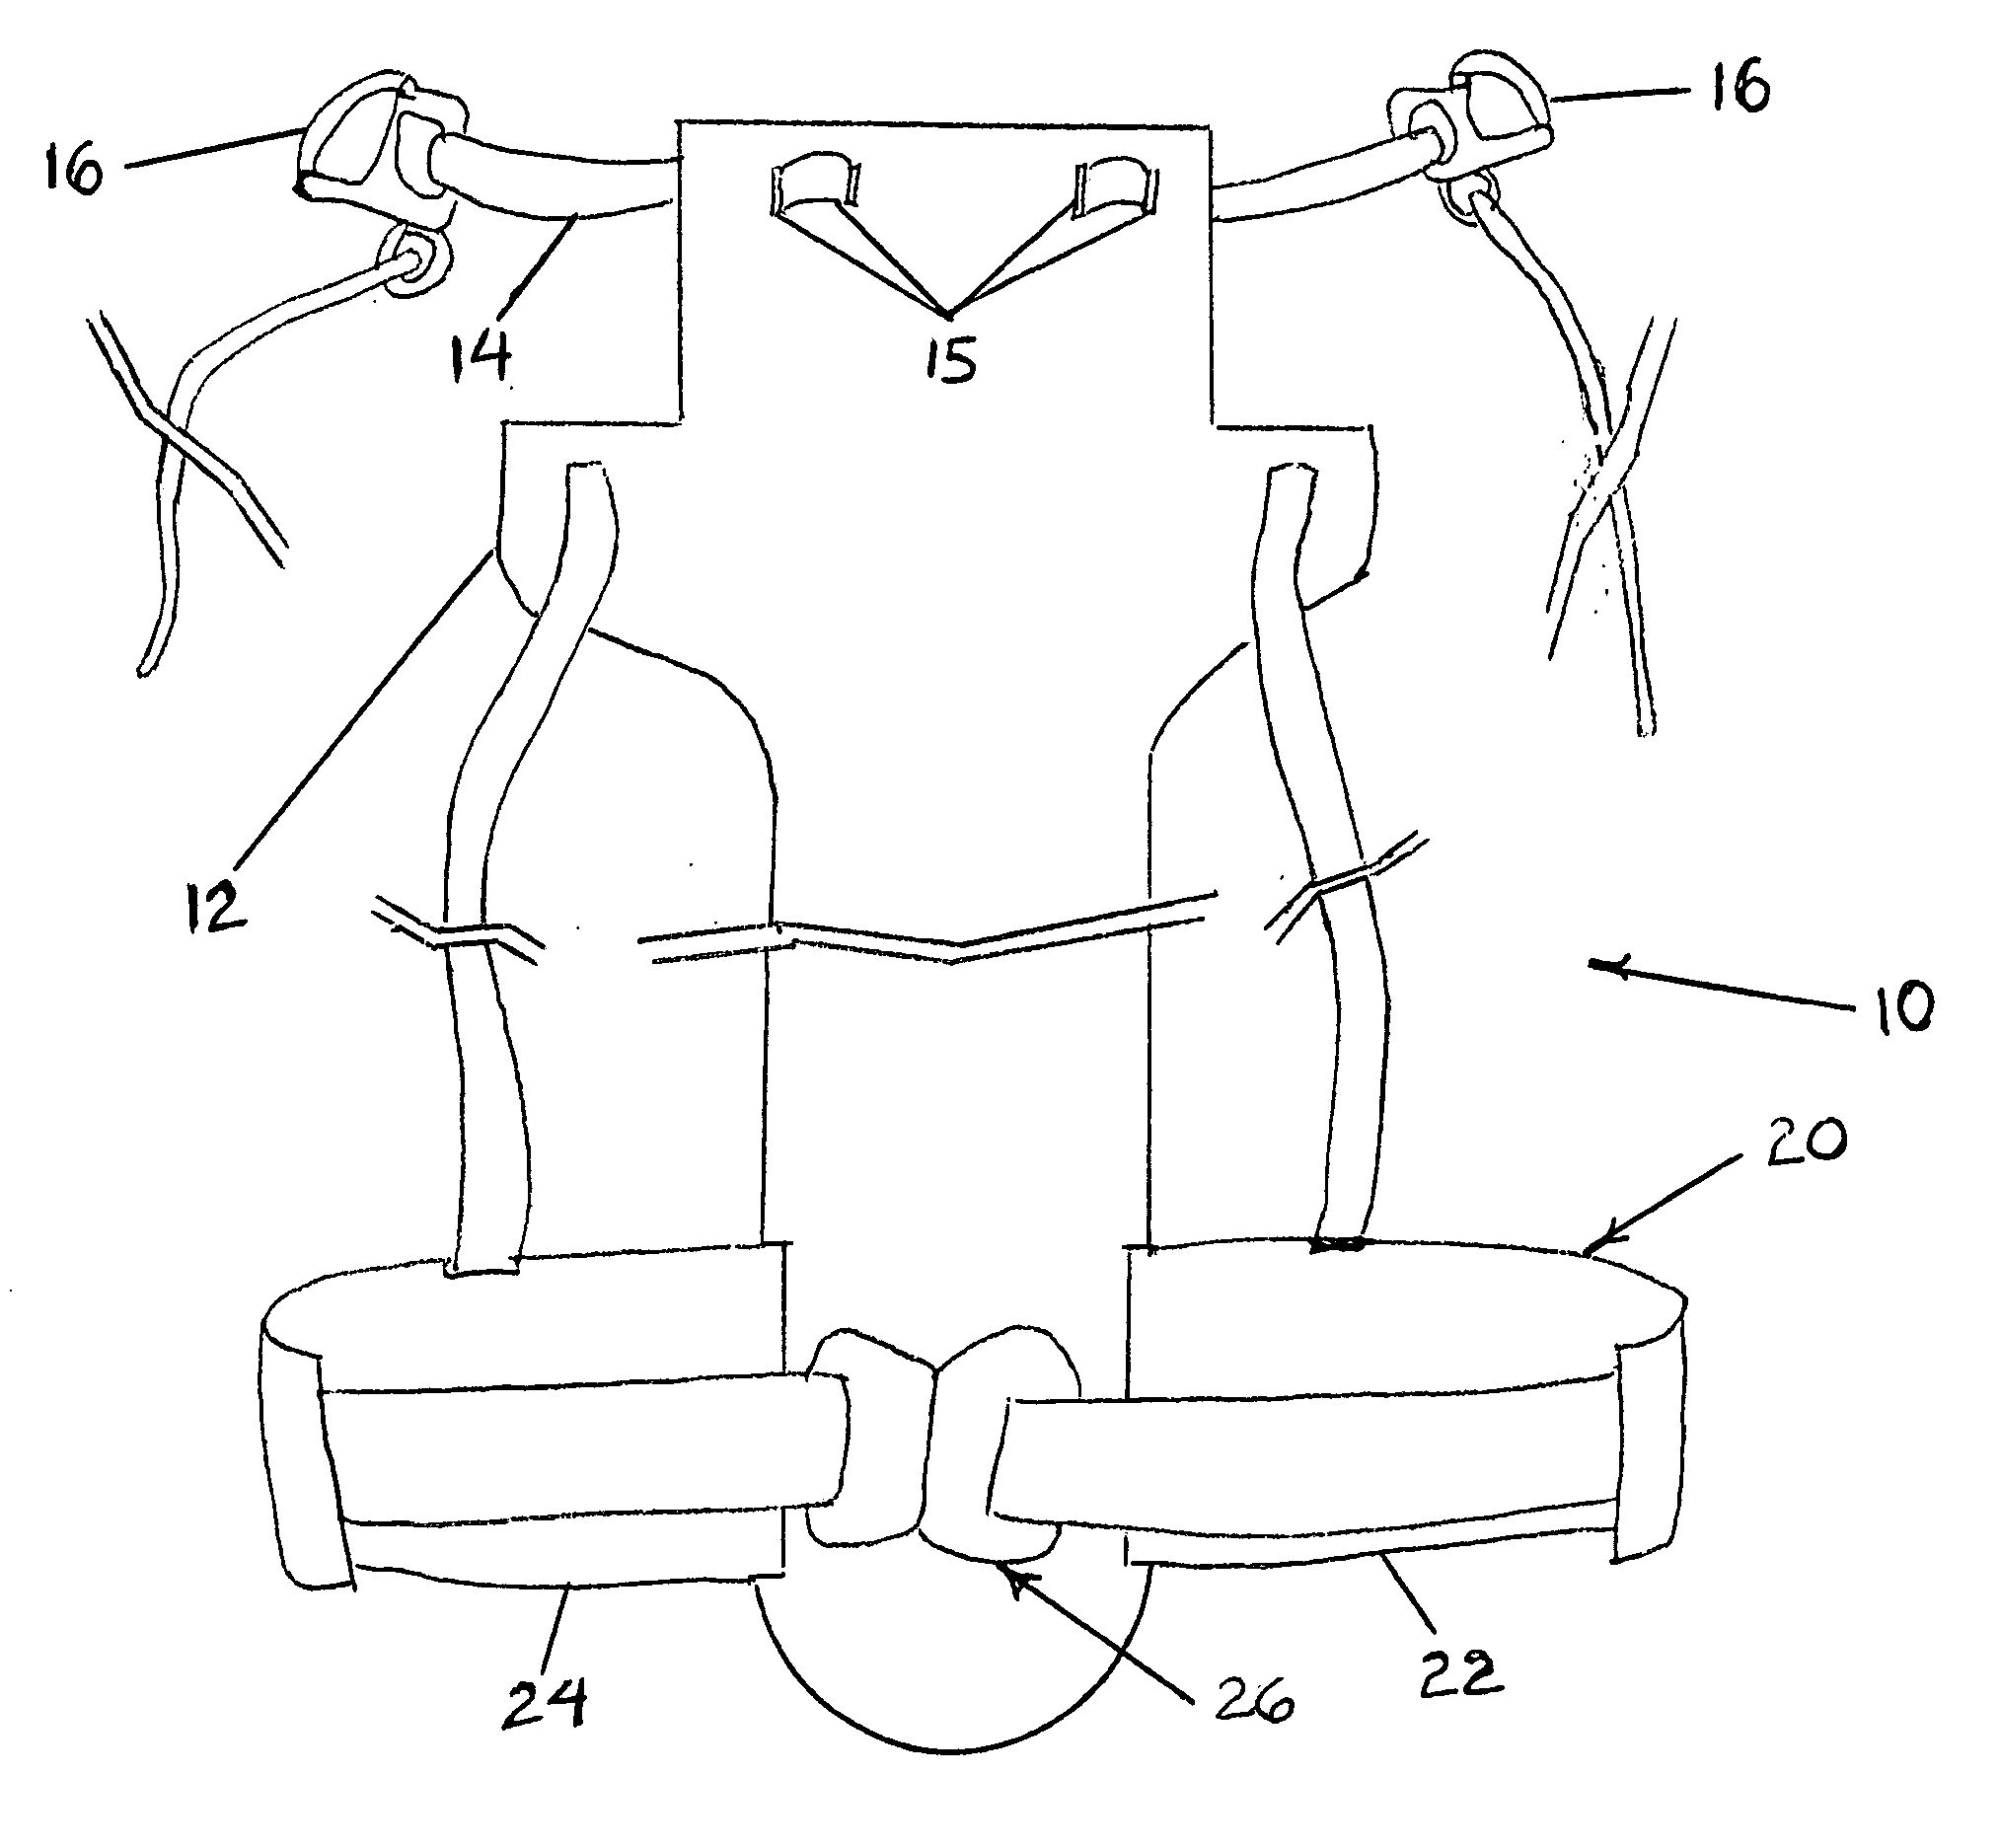 Head restraint device with back member